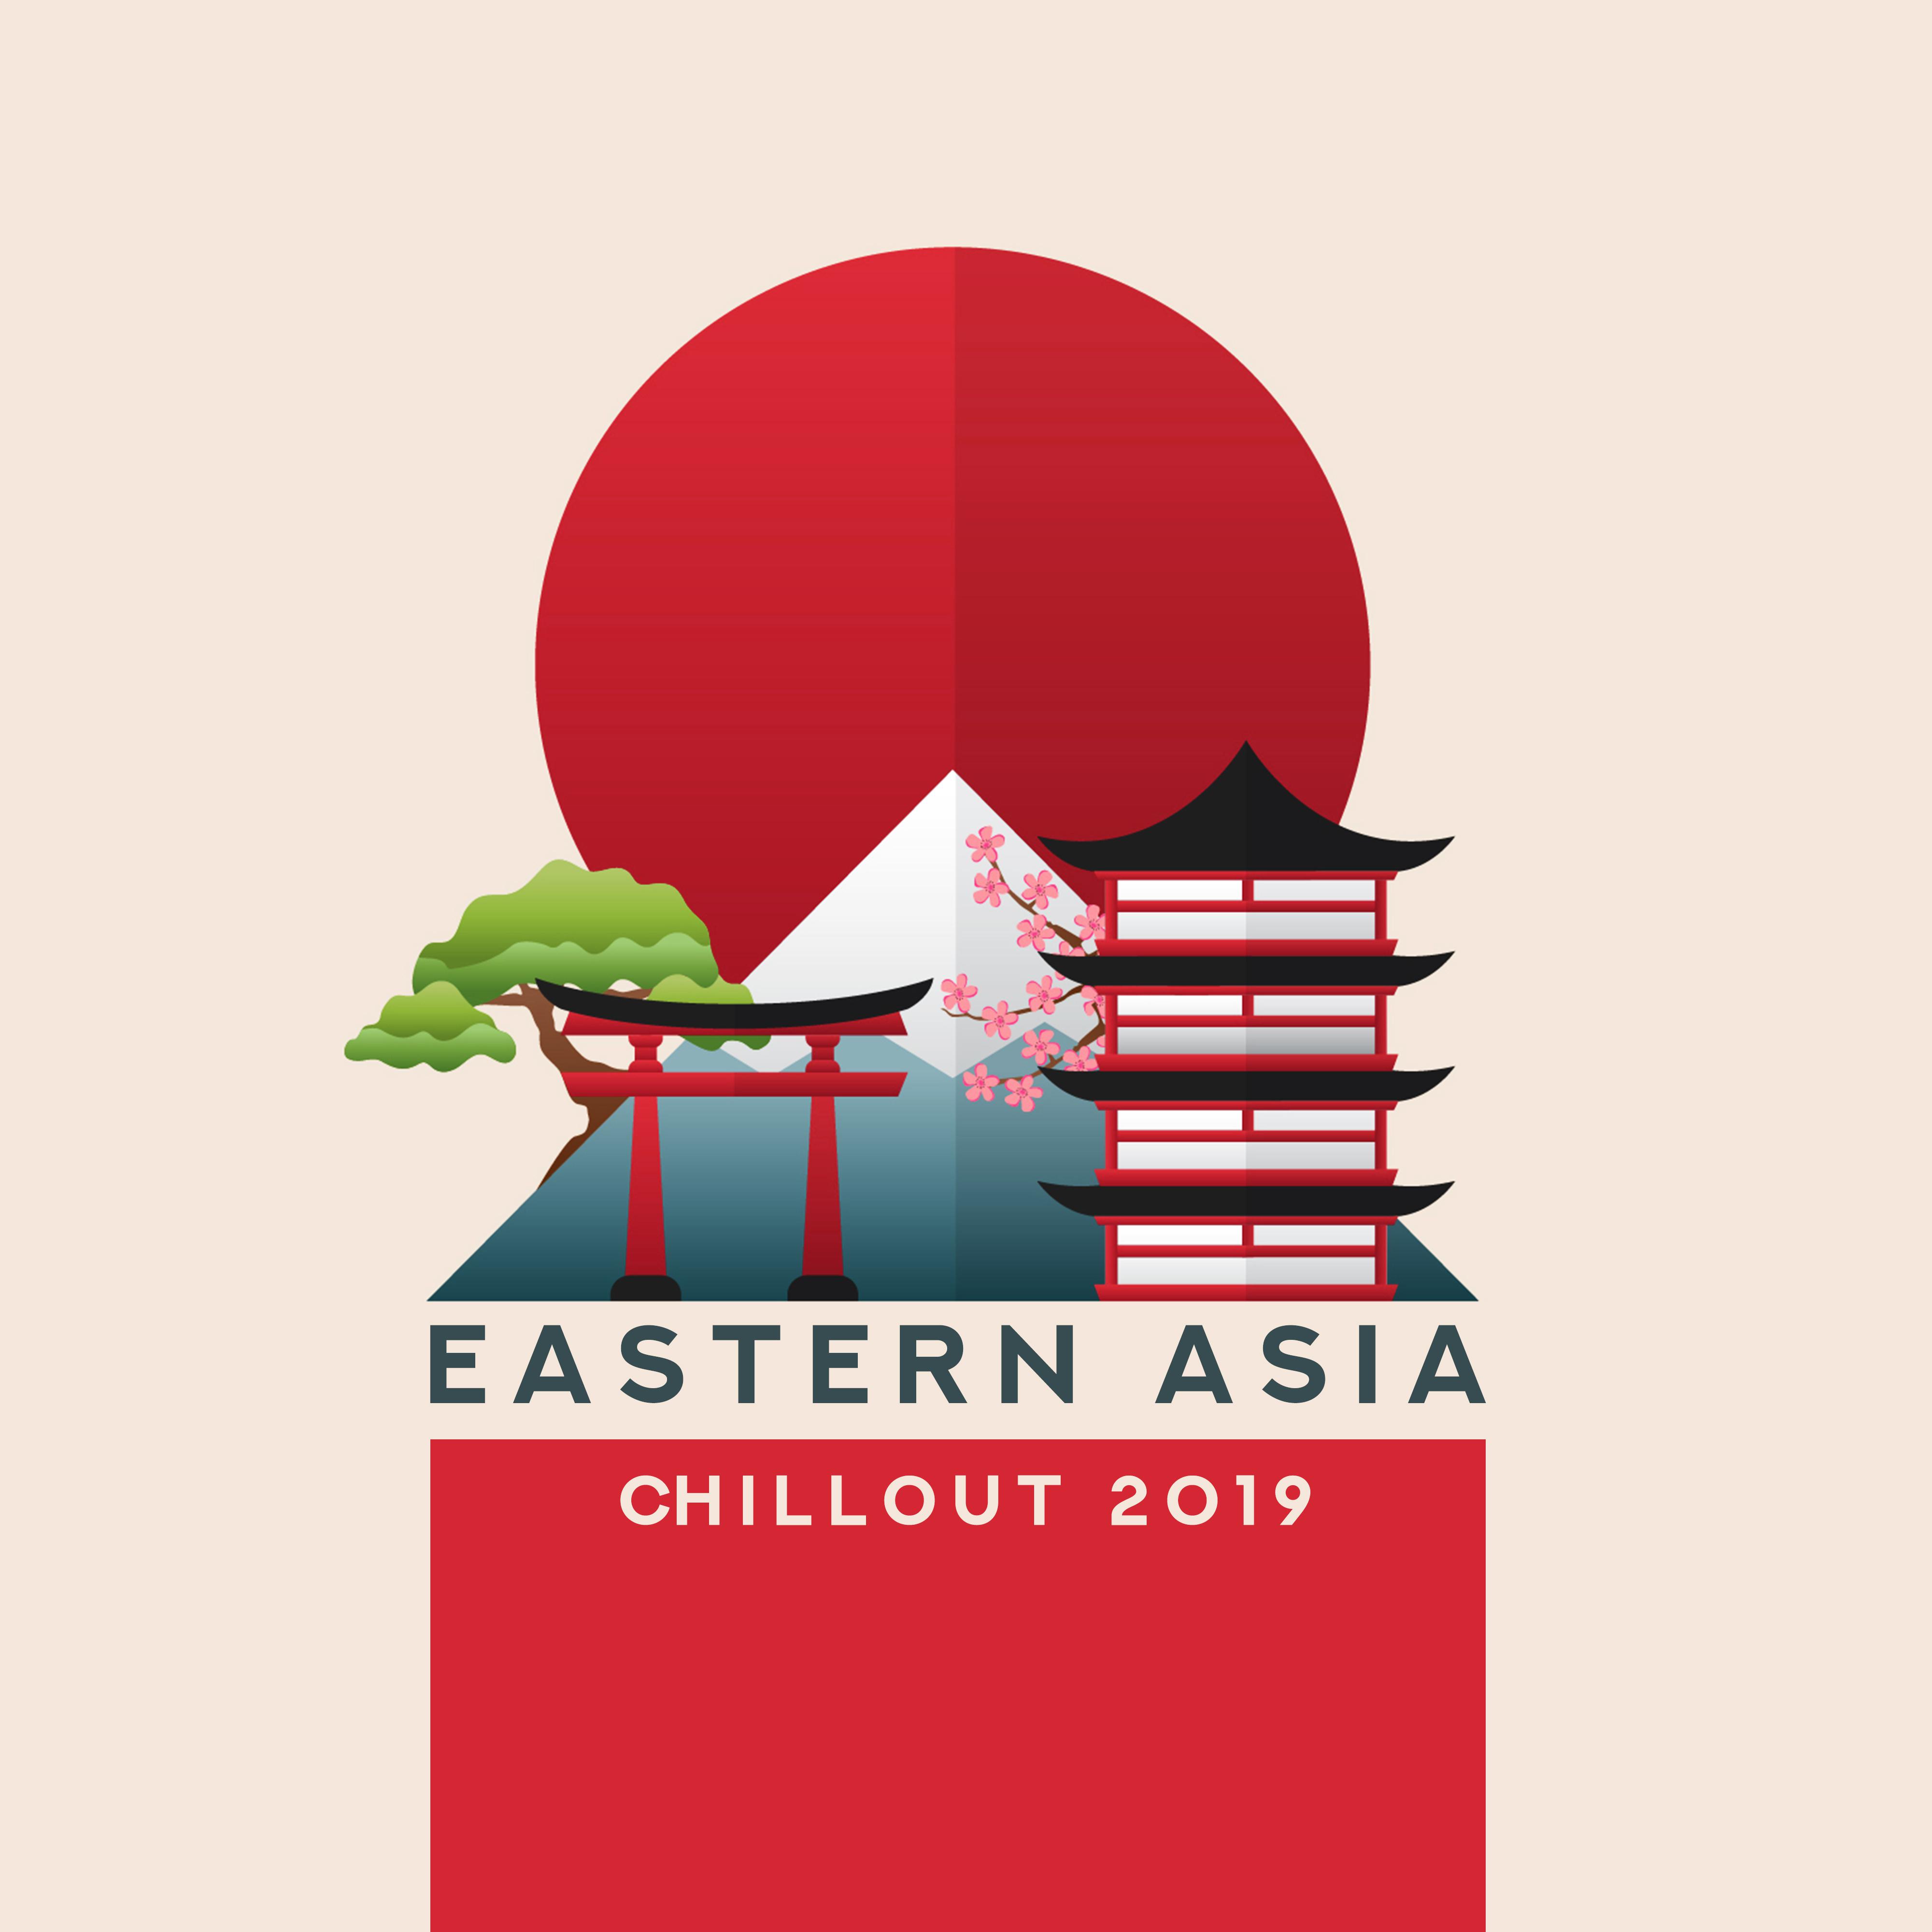 Eastern Asia Chillout 2019